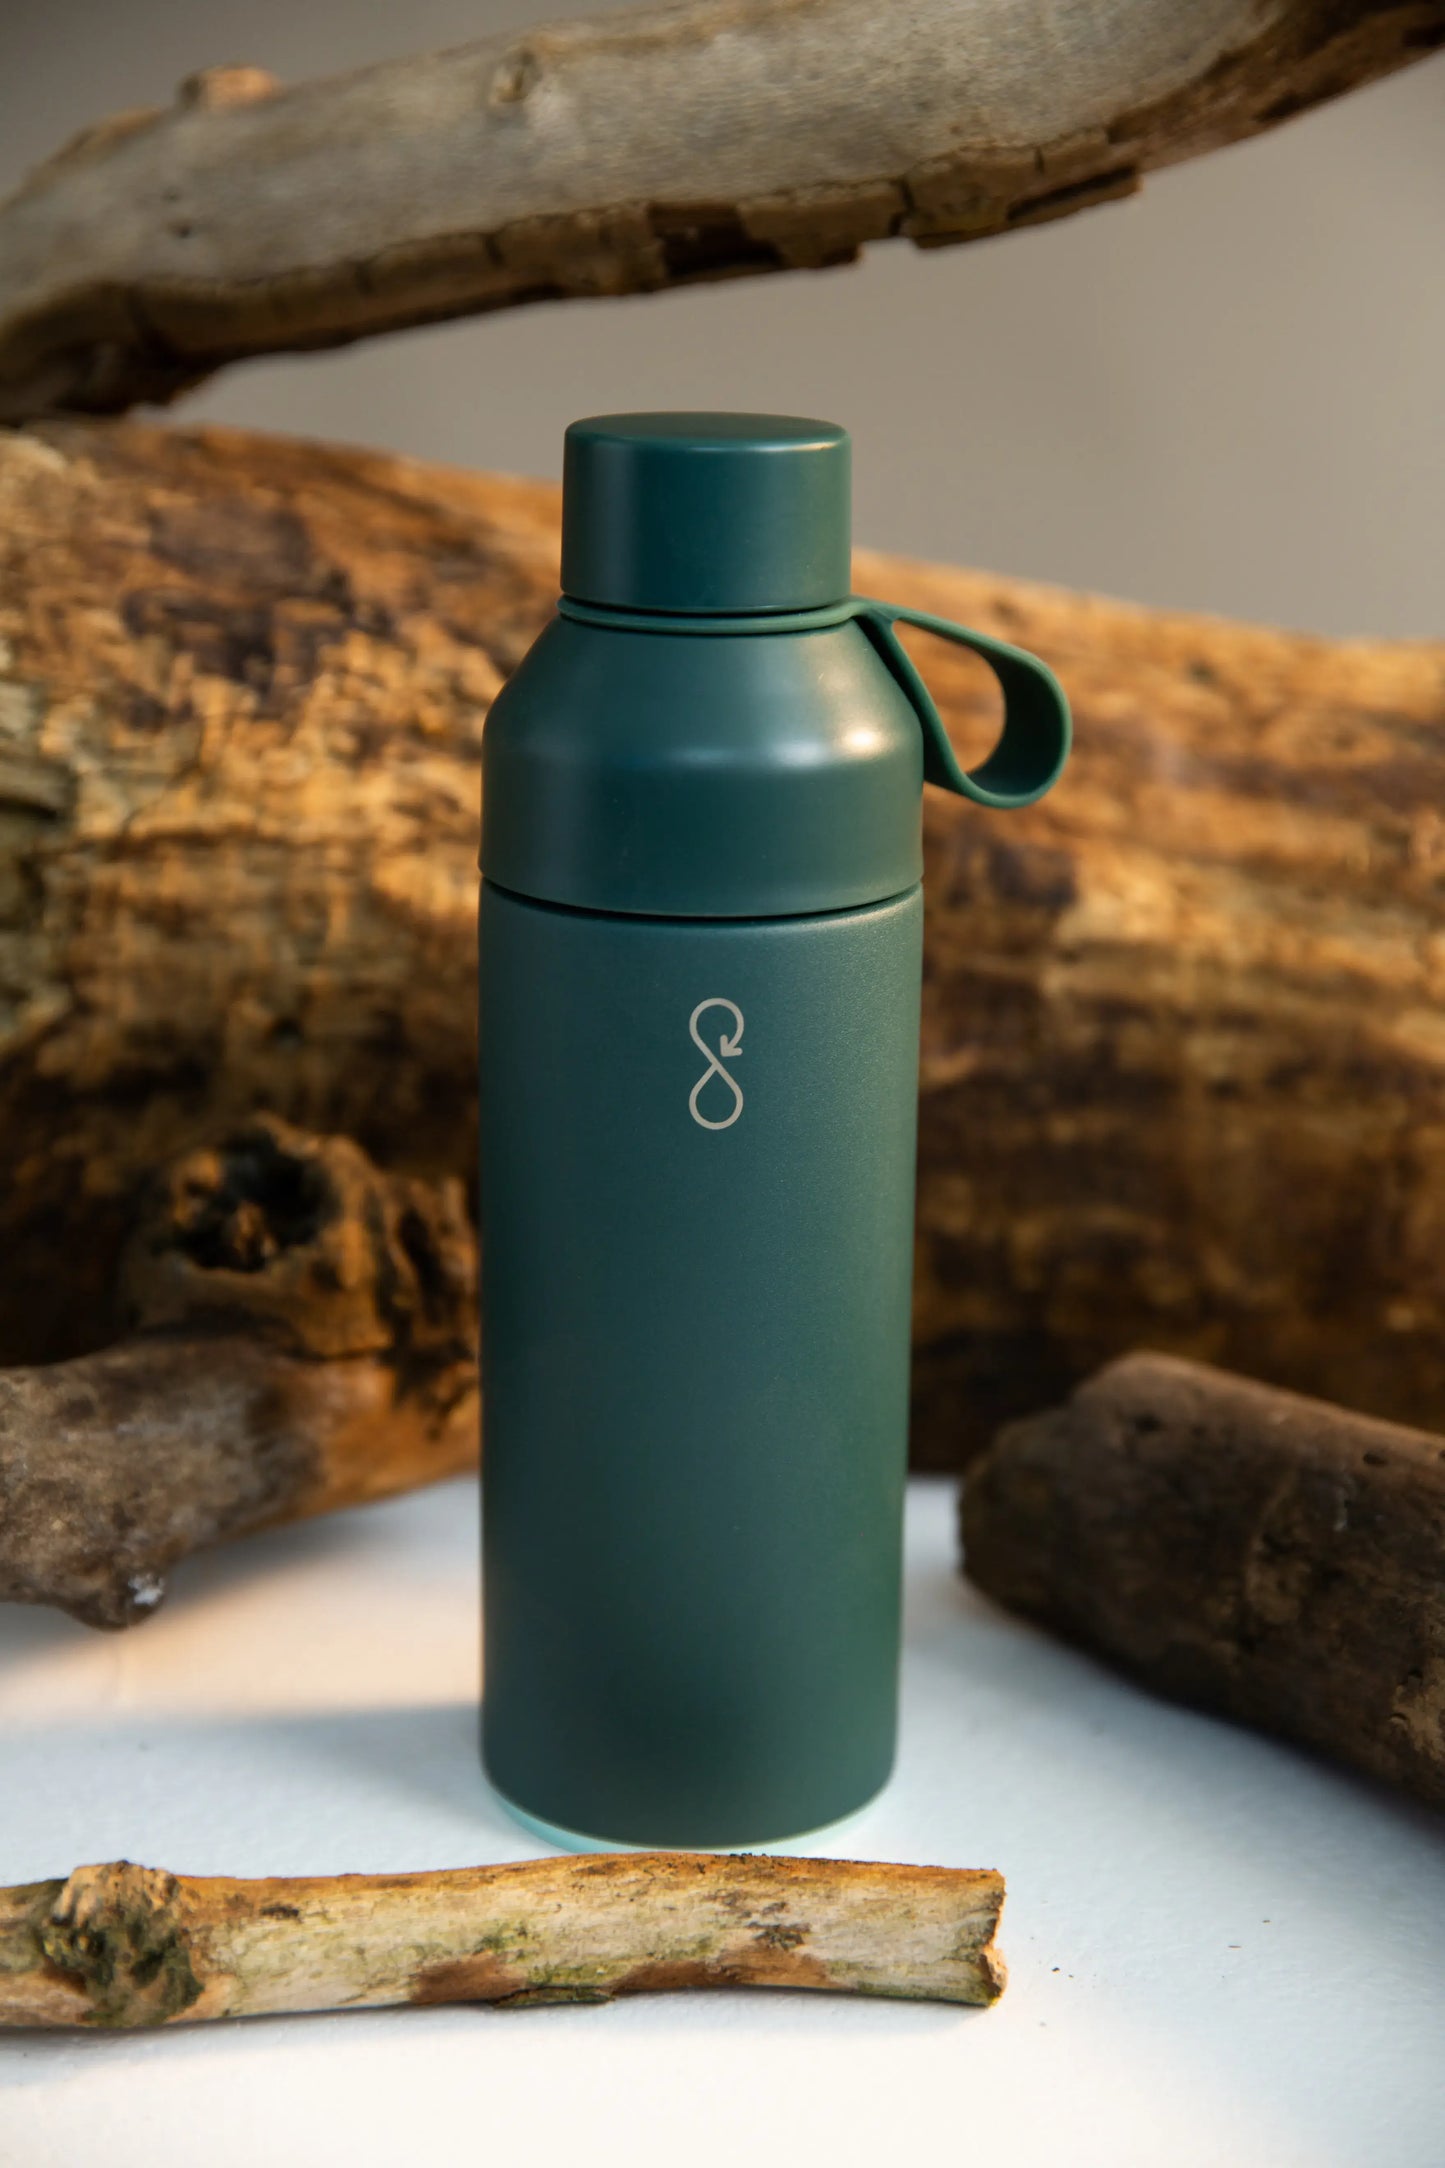 Forest green water bottle next to some wood.